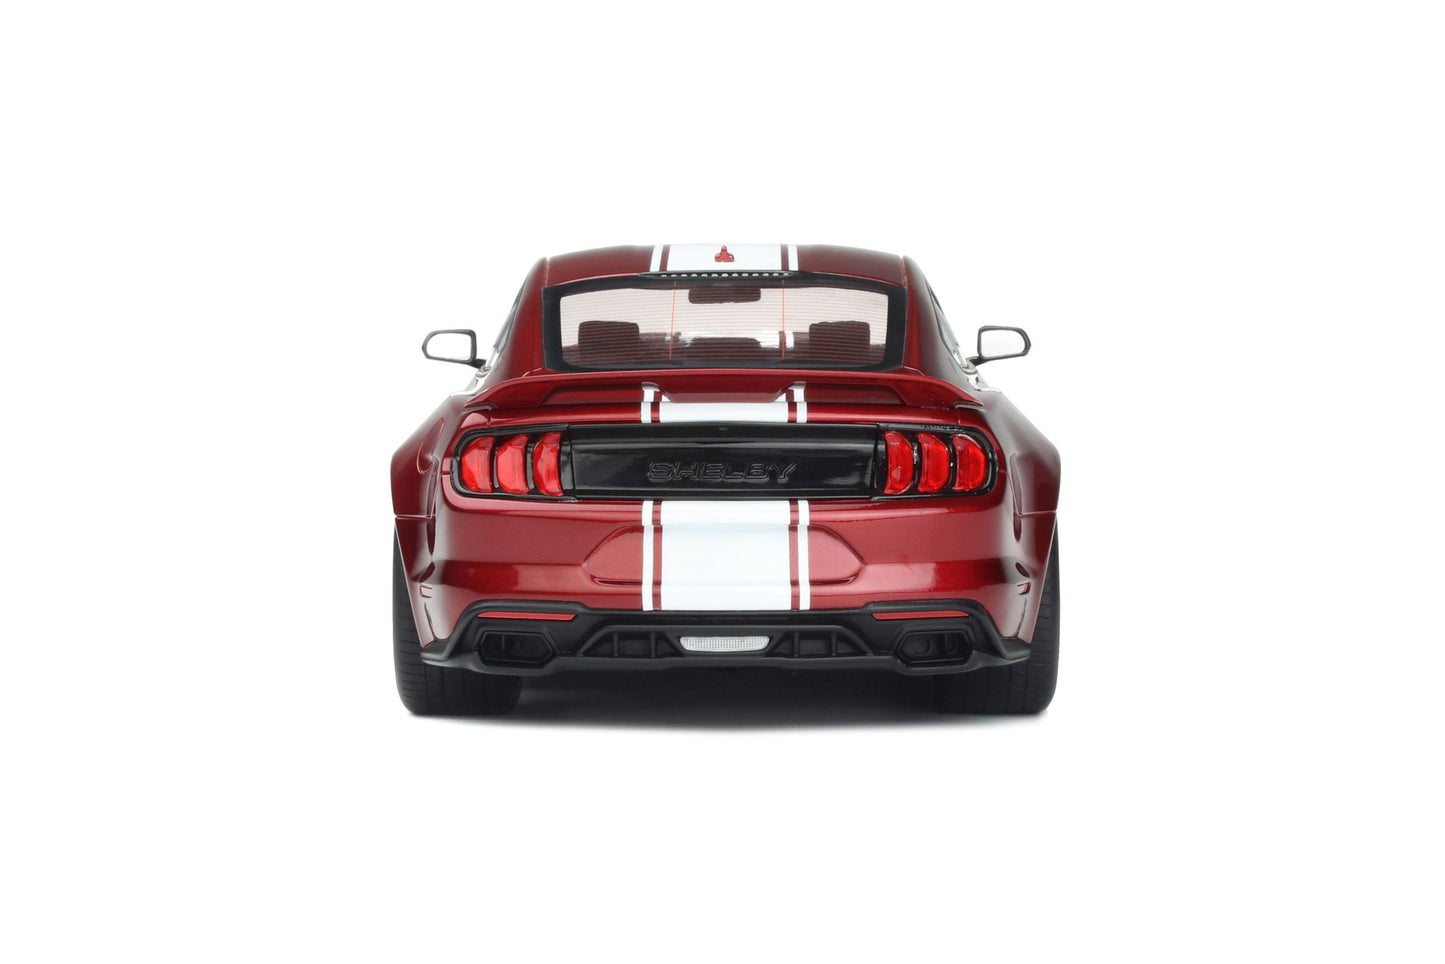 GT Spirit - Shelby Super Snake Coupe (Rapid Red) 1:18 Scale Model Car